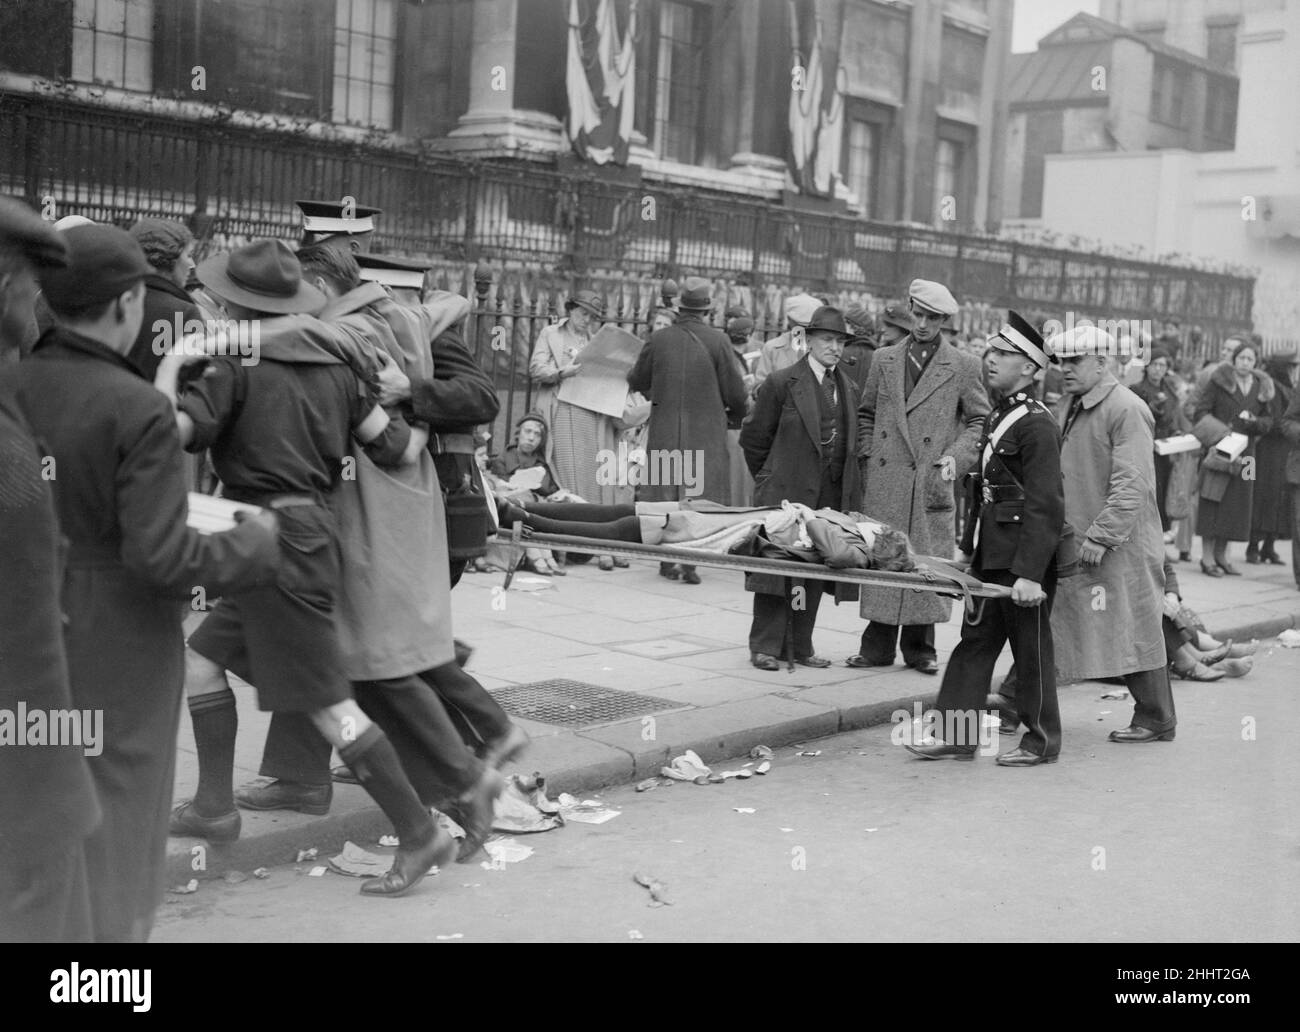 Coronation of King George VI.St Johns Ambulance workers treating injured people in the crowd near Trafalgar Square, awaiting the procession. One woman is carried away on a stretcher for treament.  12th May 1937. Stock Photo